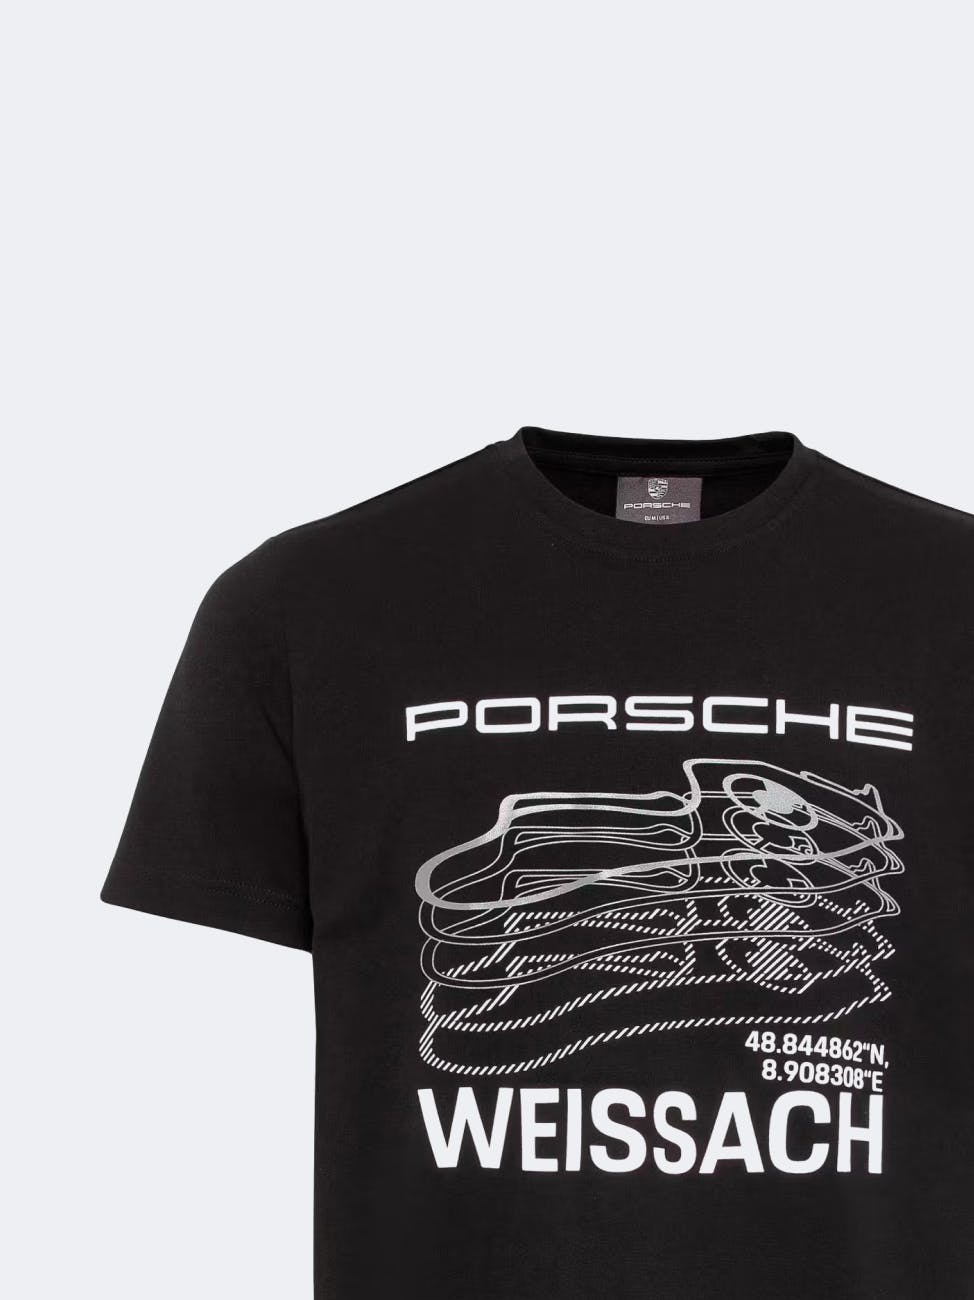 On display is a black T-shirt with a white Porsche lettering